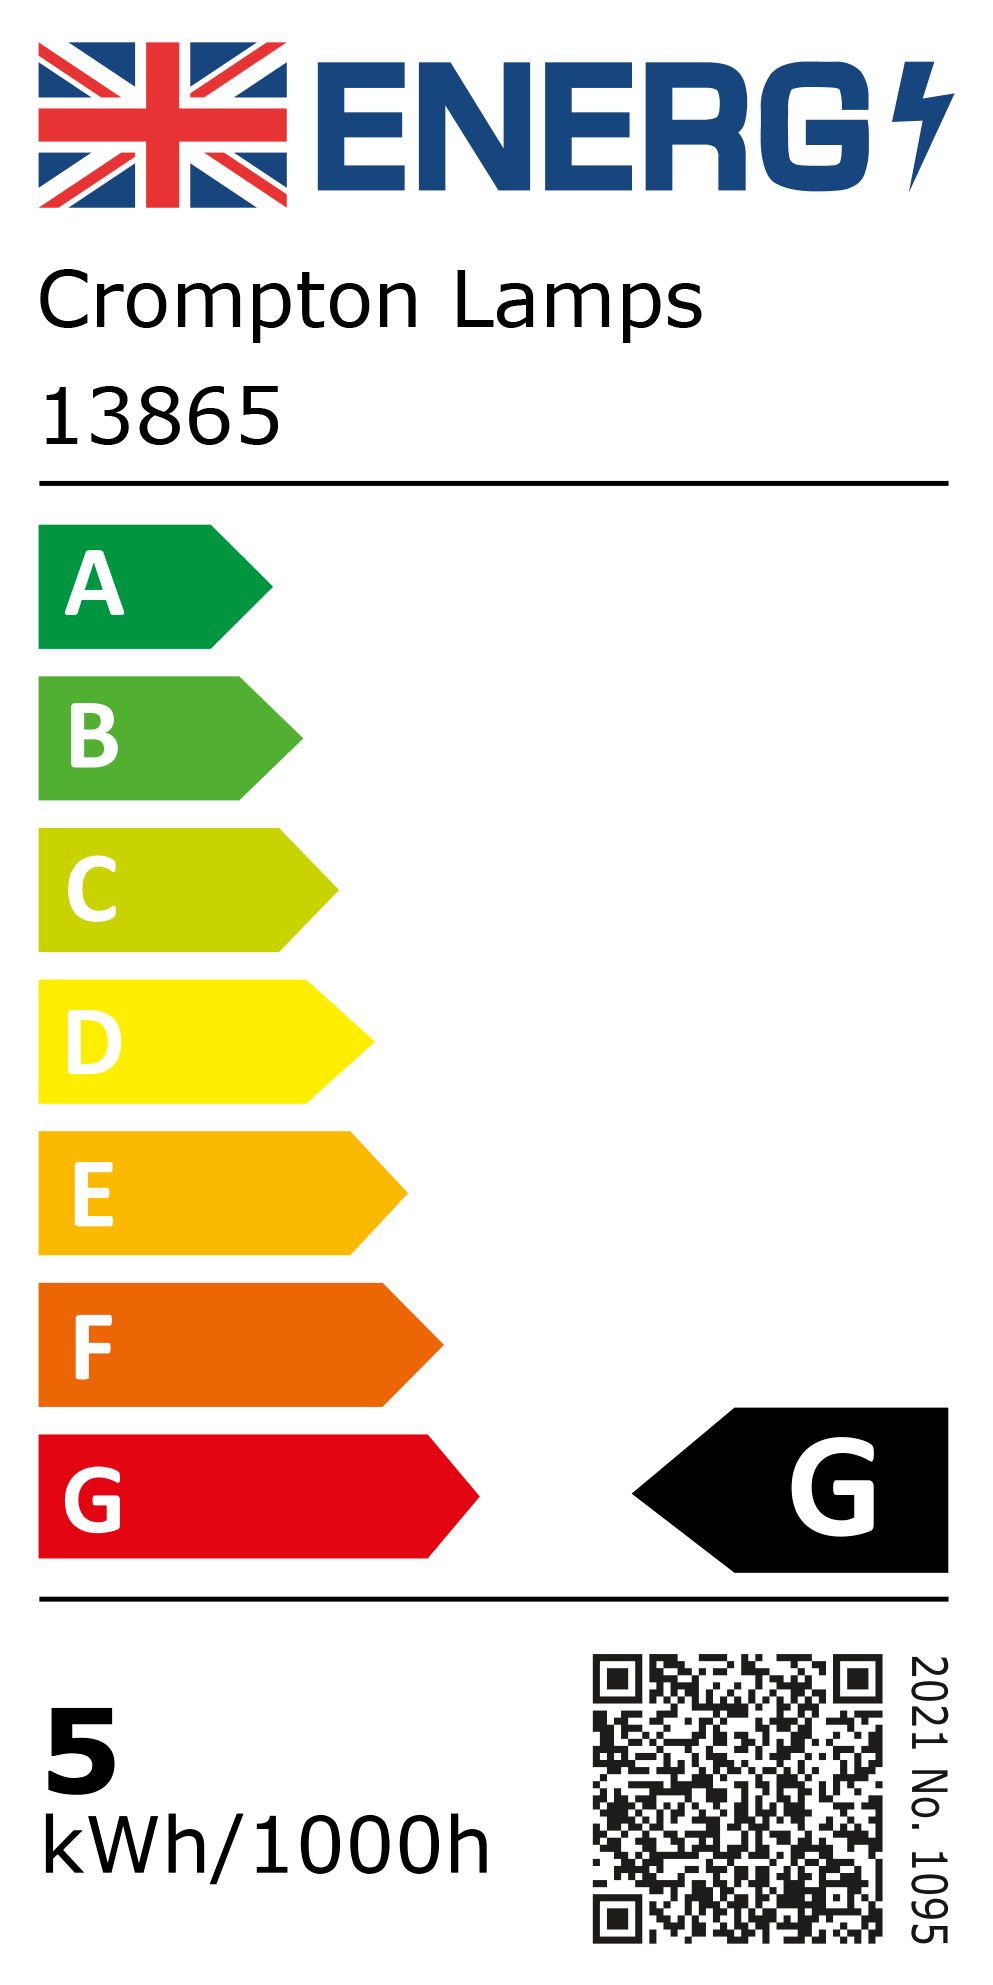 New 2021 Energy Rating Label: Stock Code 13865